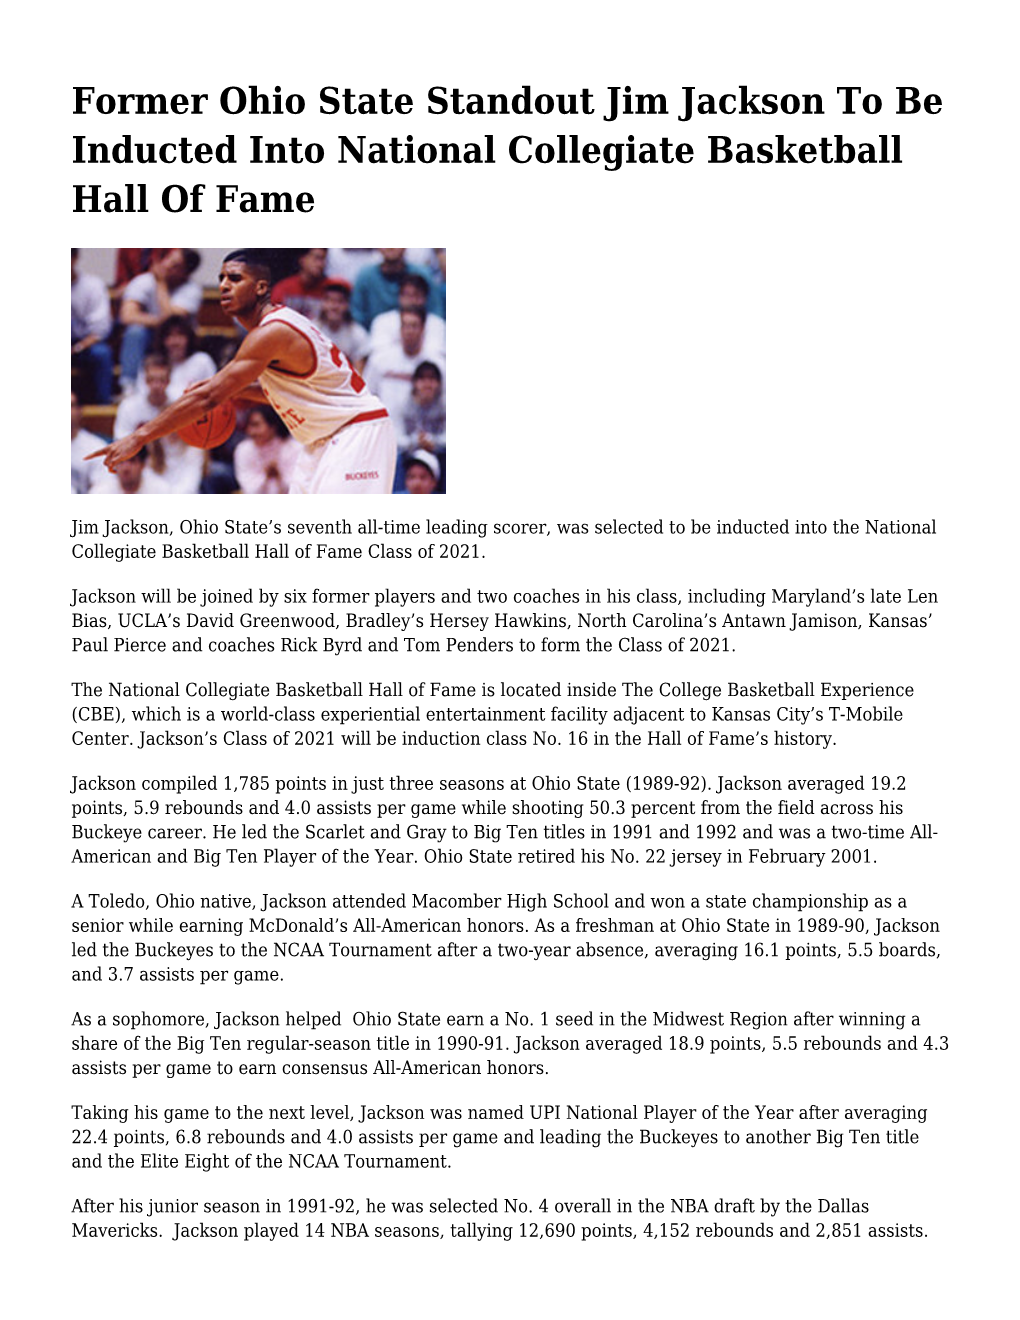 Former Ohio State Standout Jim Jackson to Be Inducted Into National Collegiate Basketball Hall of Fame